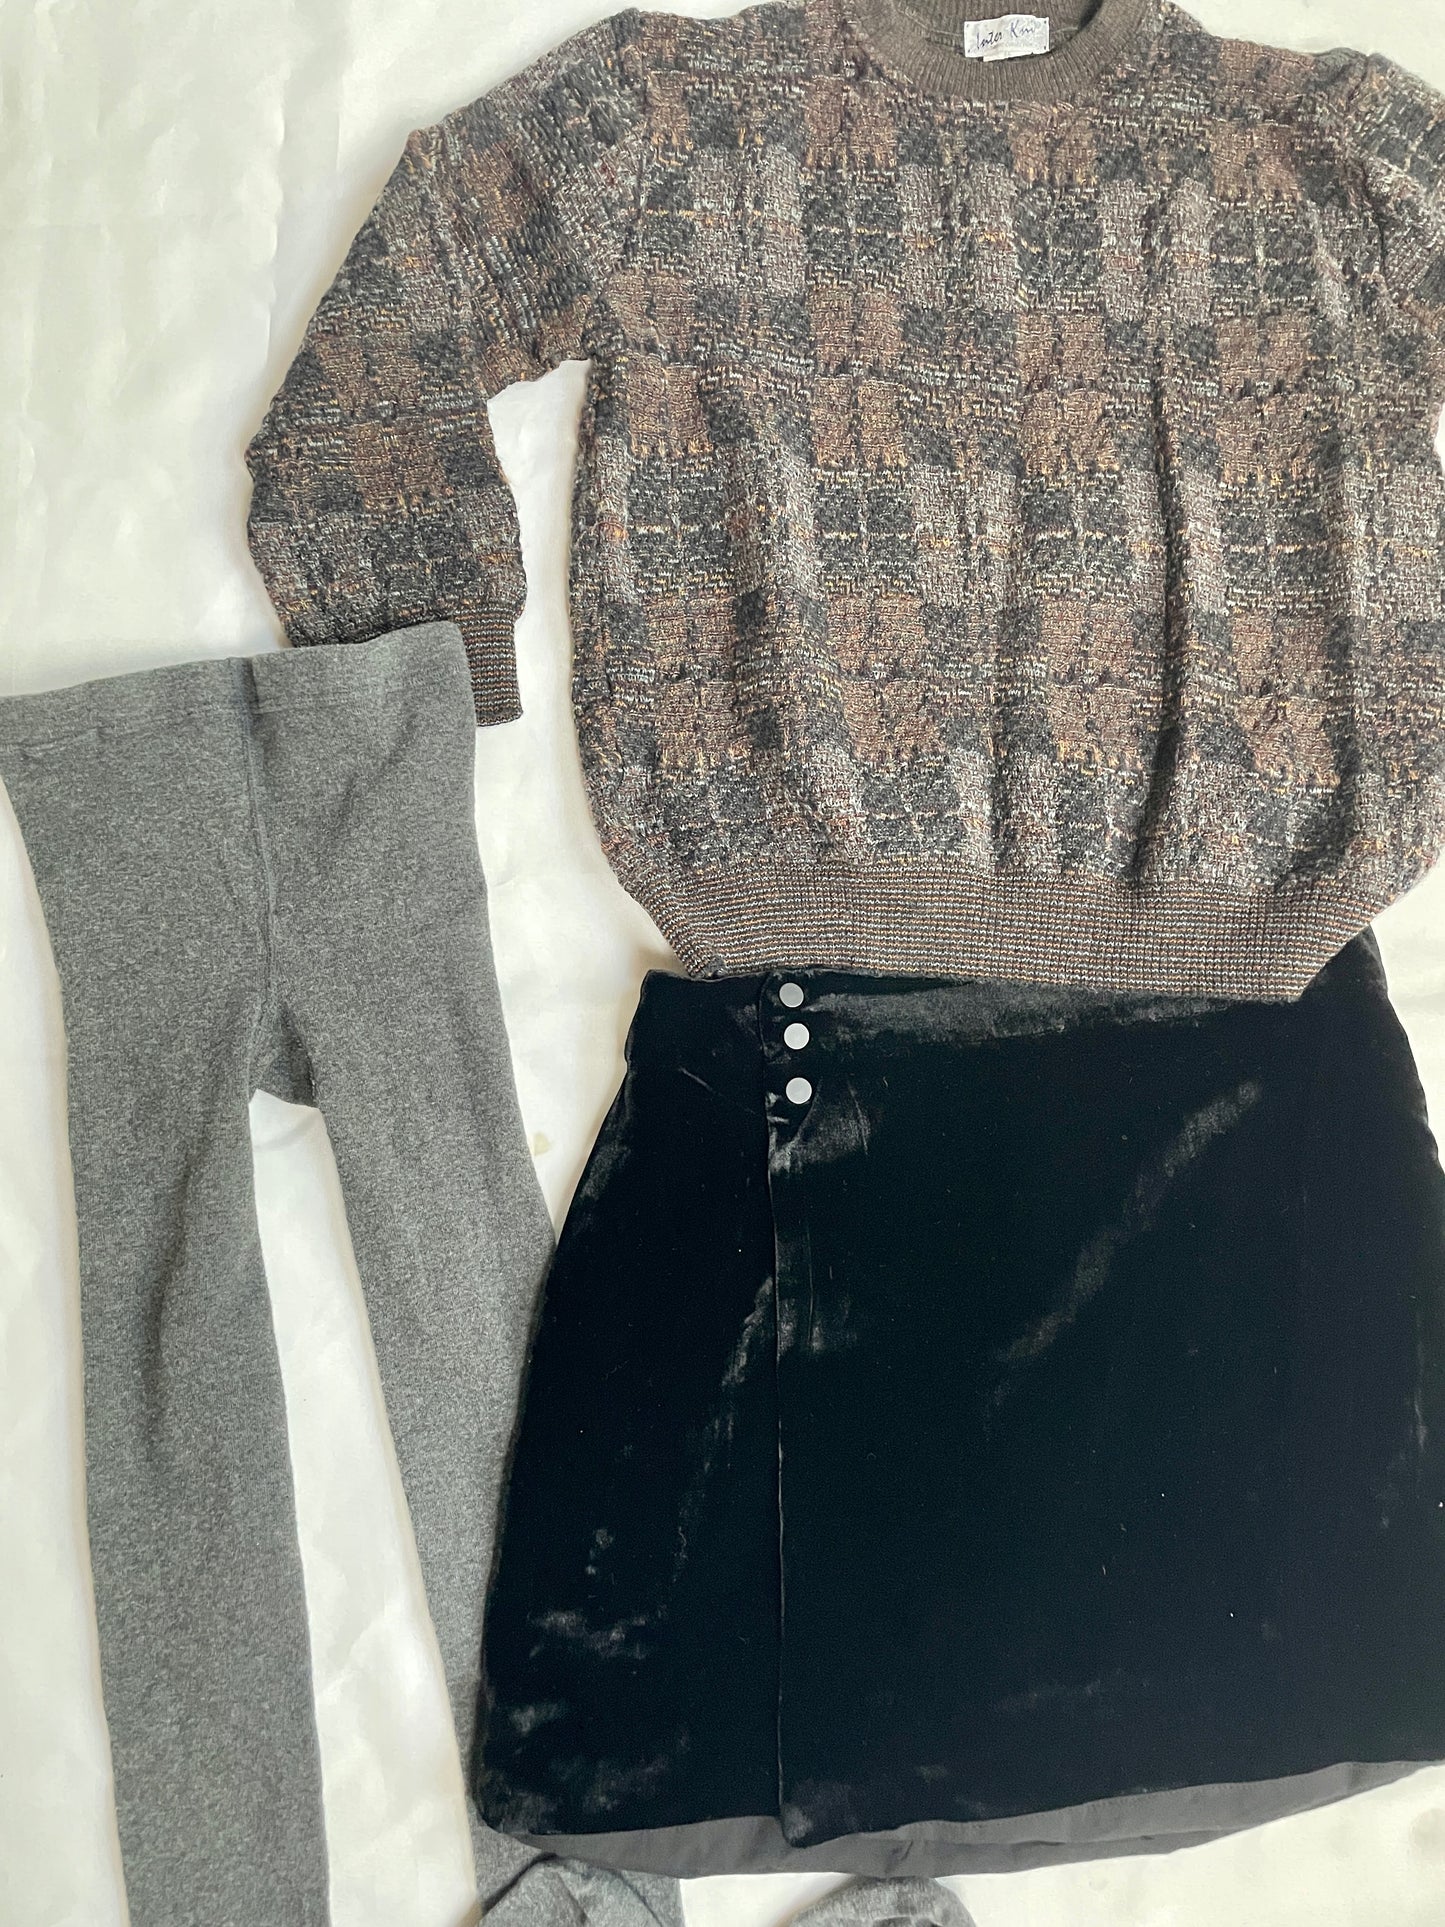 FALL inspired outfit bundle - sweater + skirt + tights